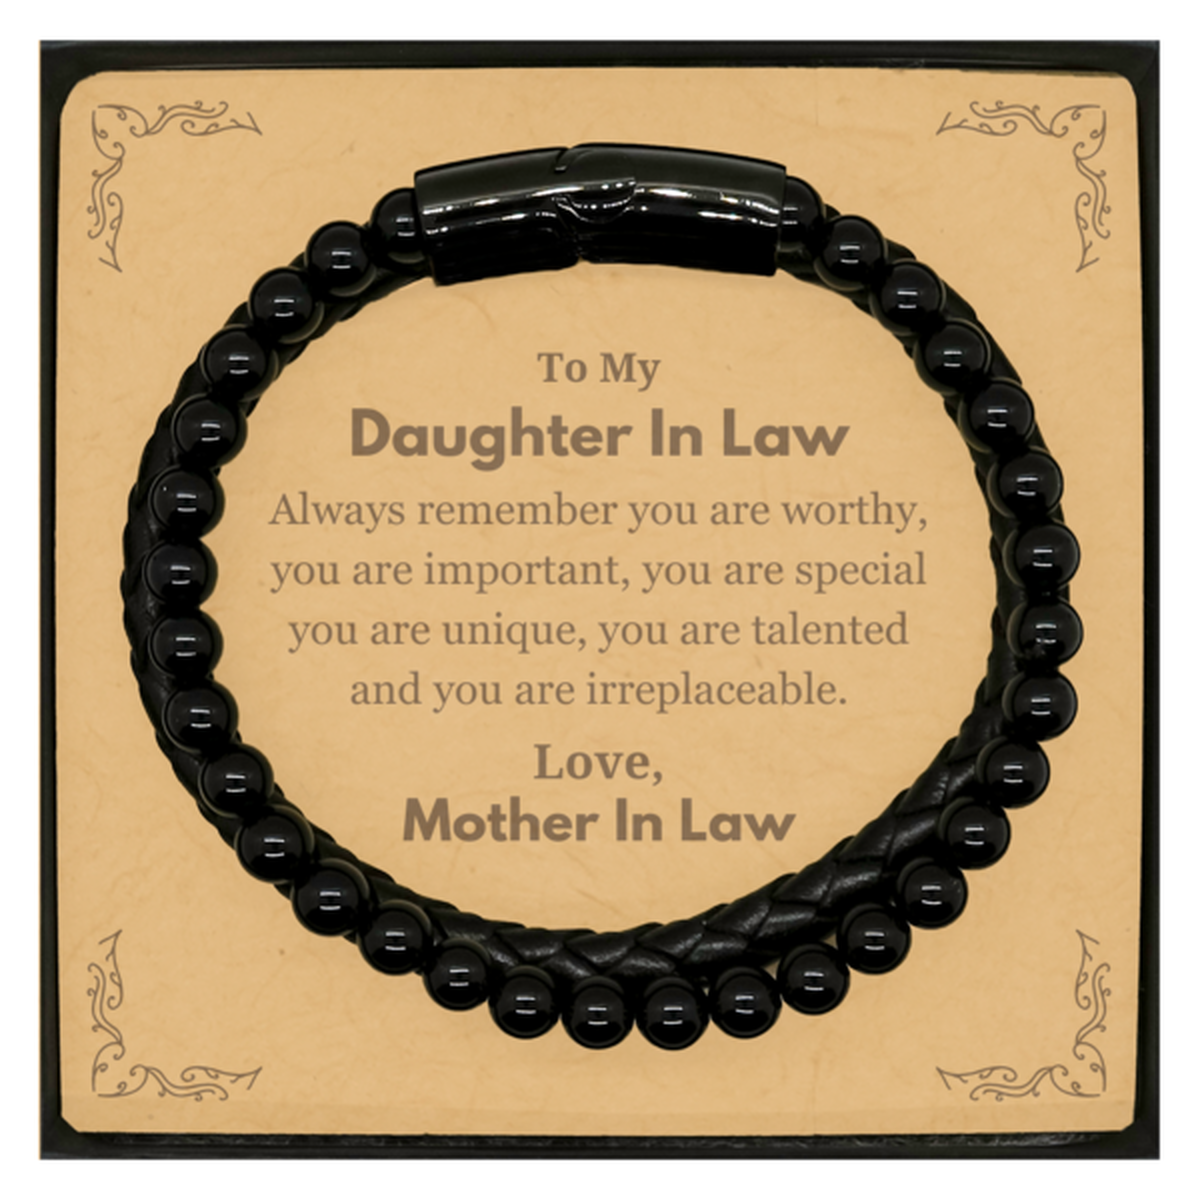 Daughter In Law Birthday Gifts from Mother In Law, Inspirational Stone Leather Bracelets for Daughter In Law Christmas Graduation Gifts for Daughter In Law Always remember you are worthy, you are important. Love, Mother In Law